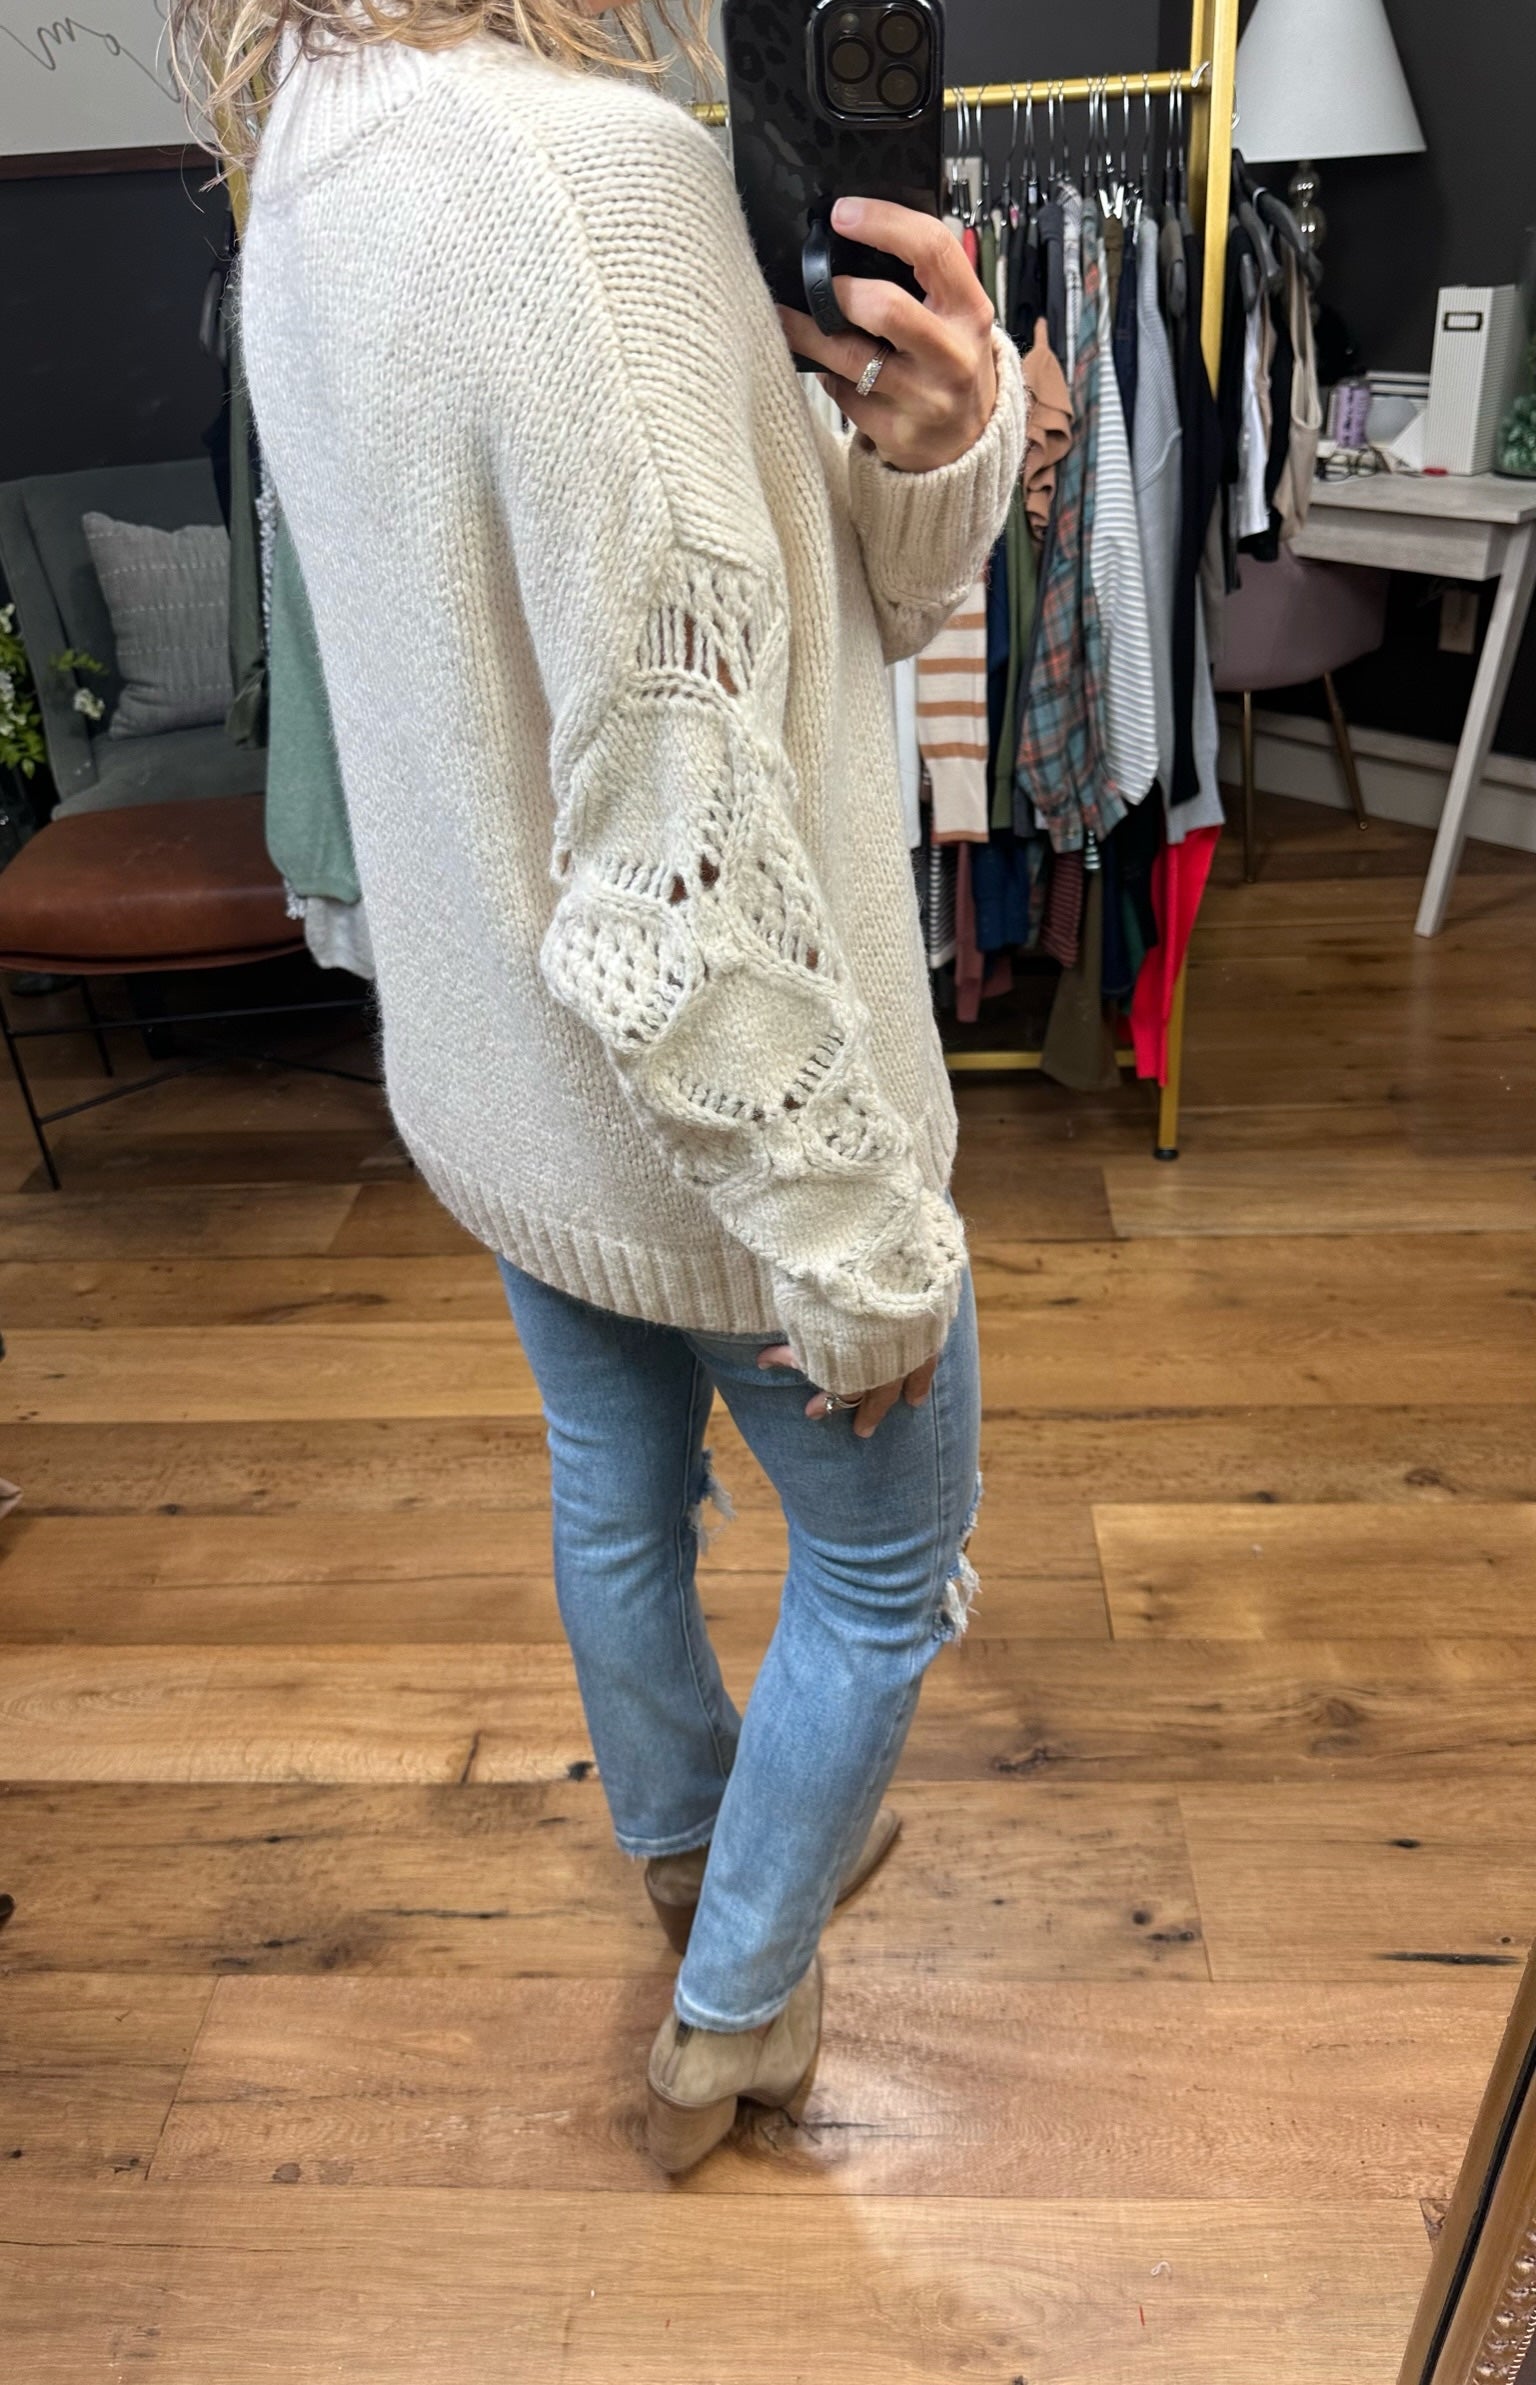 What I Say Mockneck Sweater with Arm Detail - Cream